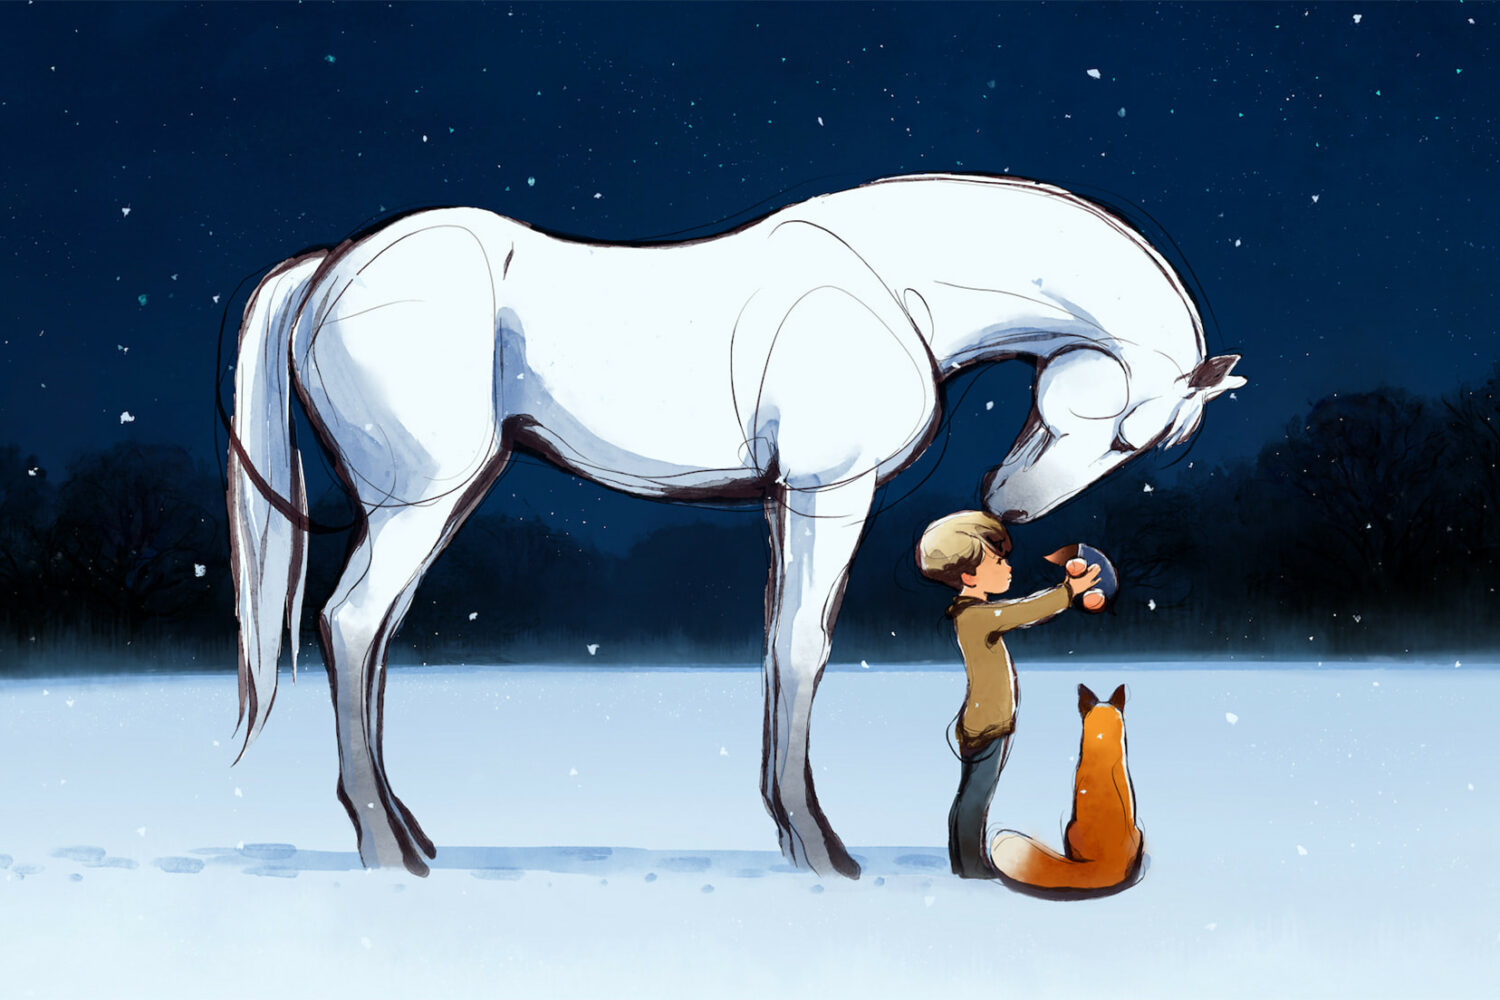 Illustration depicting a boy, a horse and a fox for the Apple TV+ animated short film “The Boy, the Mole, the Fox and the Horse”